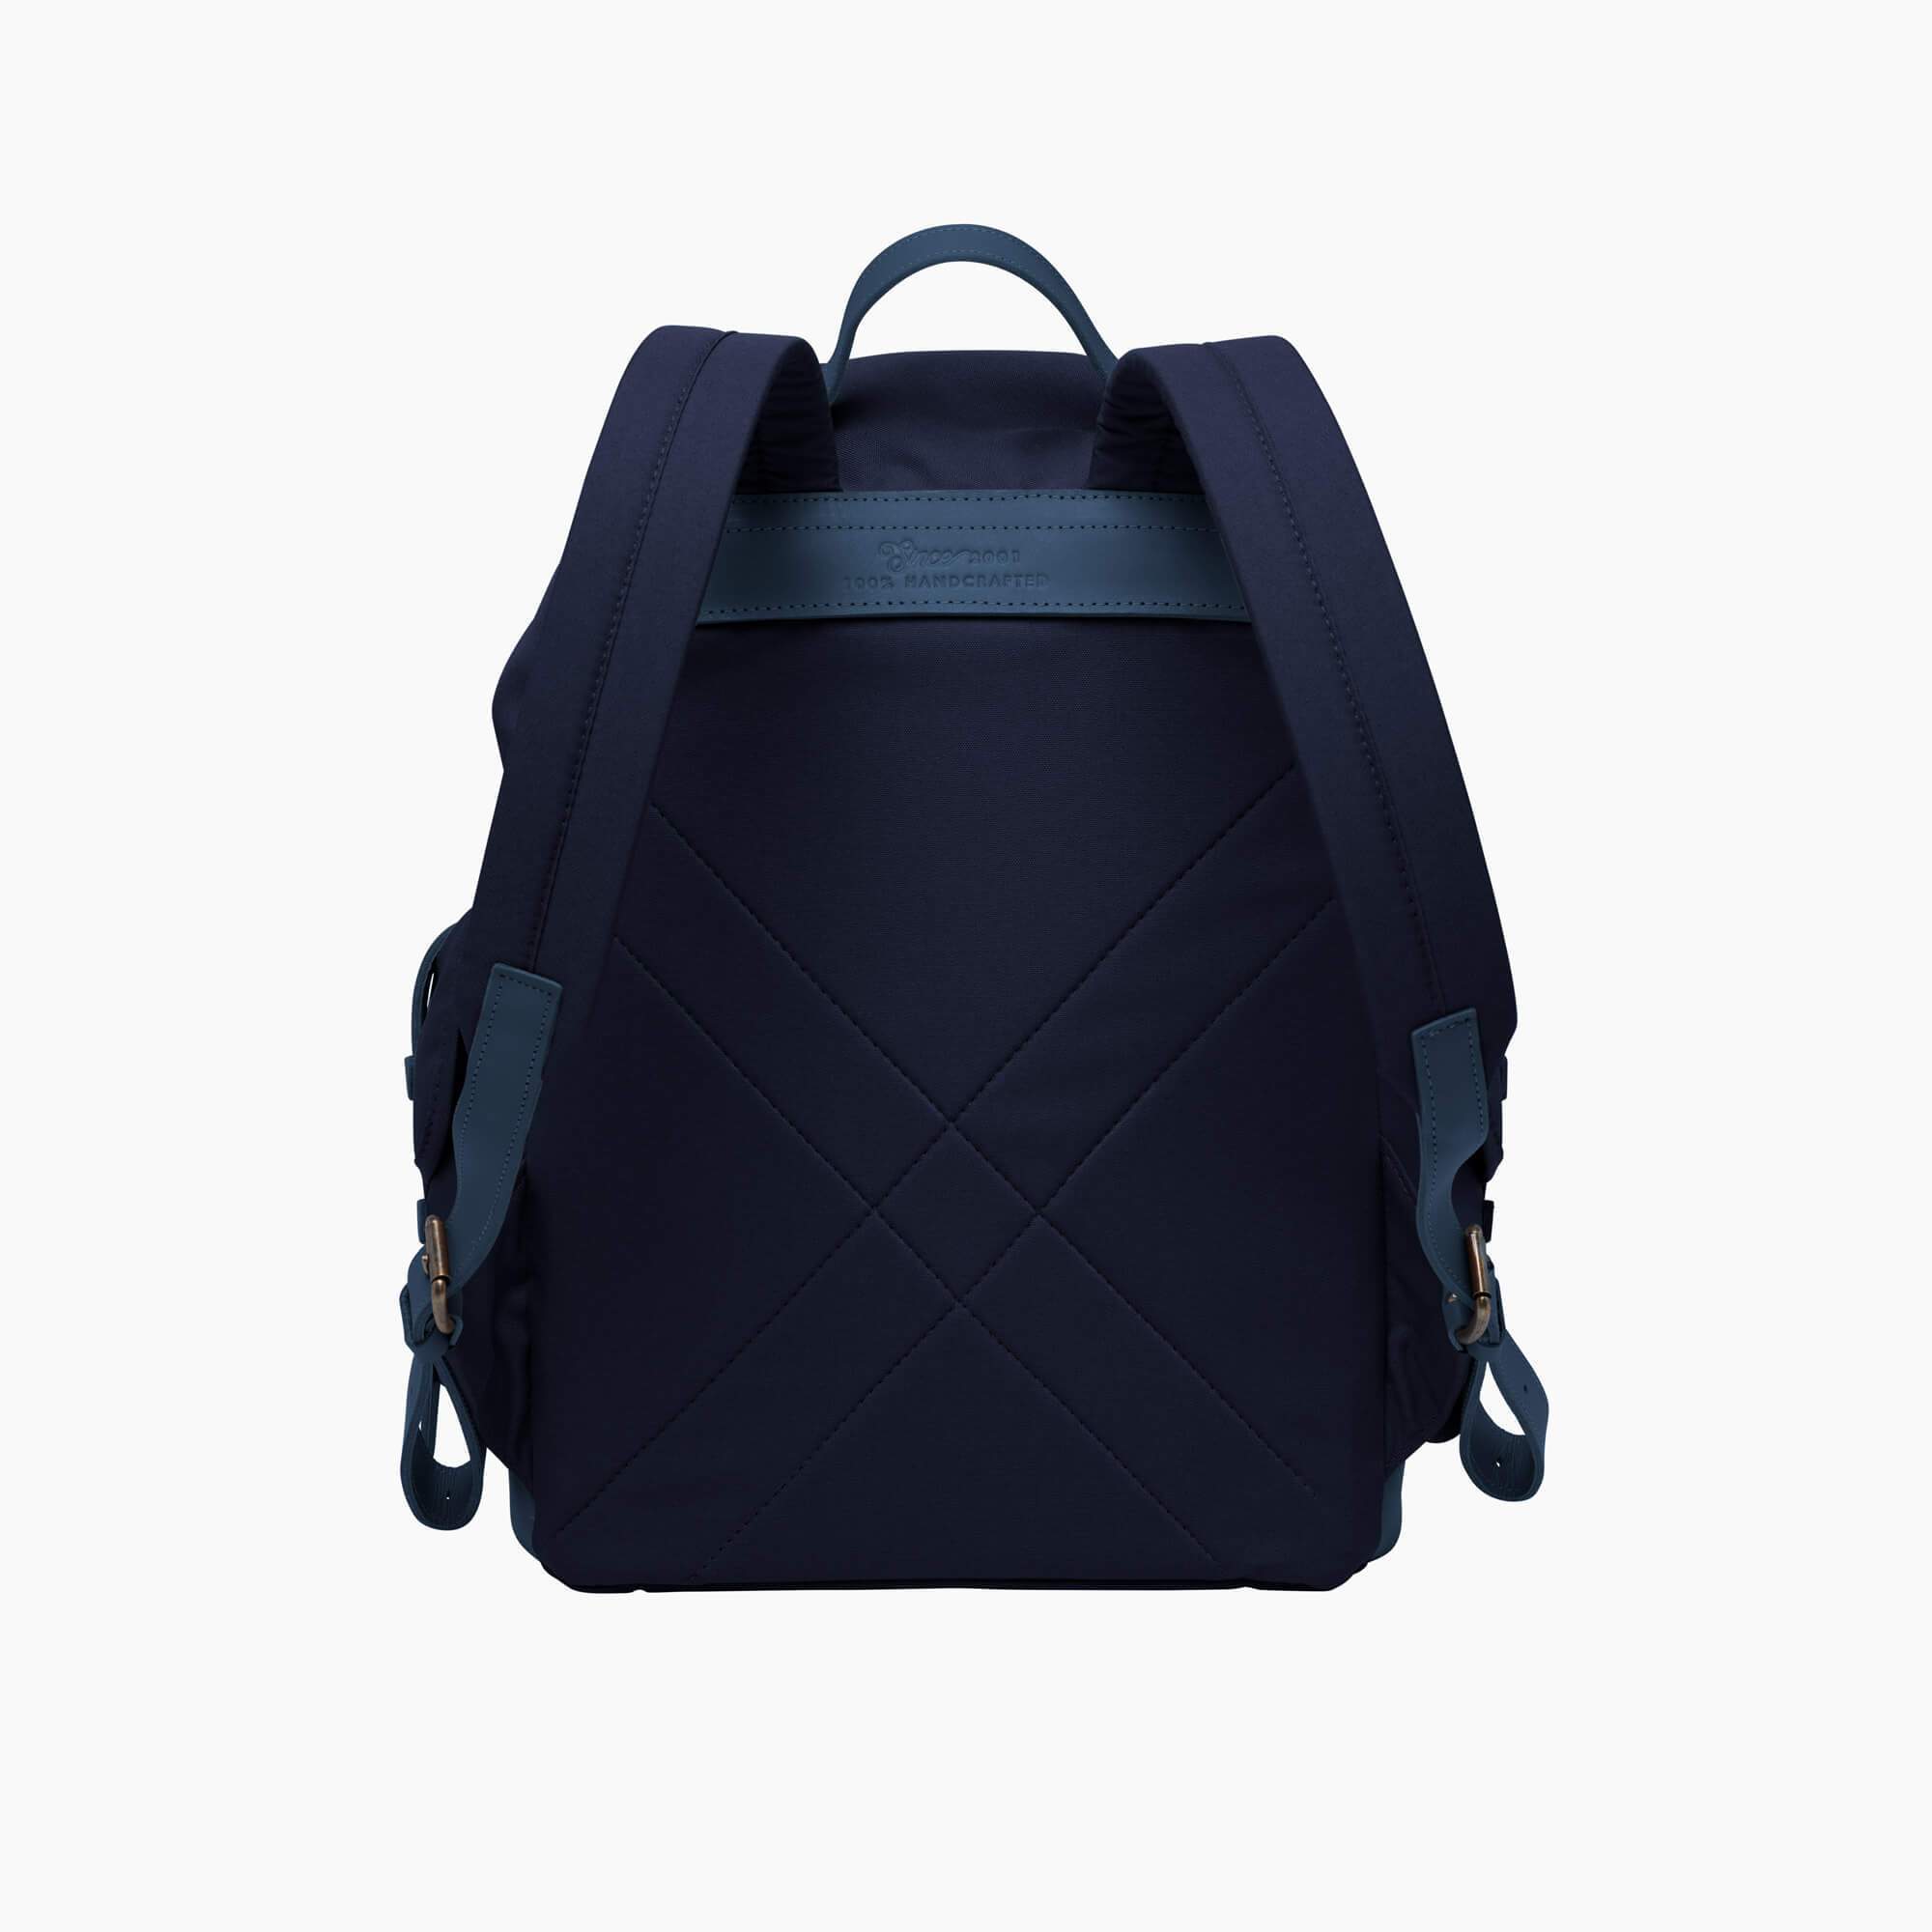 Beatnik & Sons Leather backpacks the Henry Colors backpack